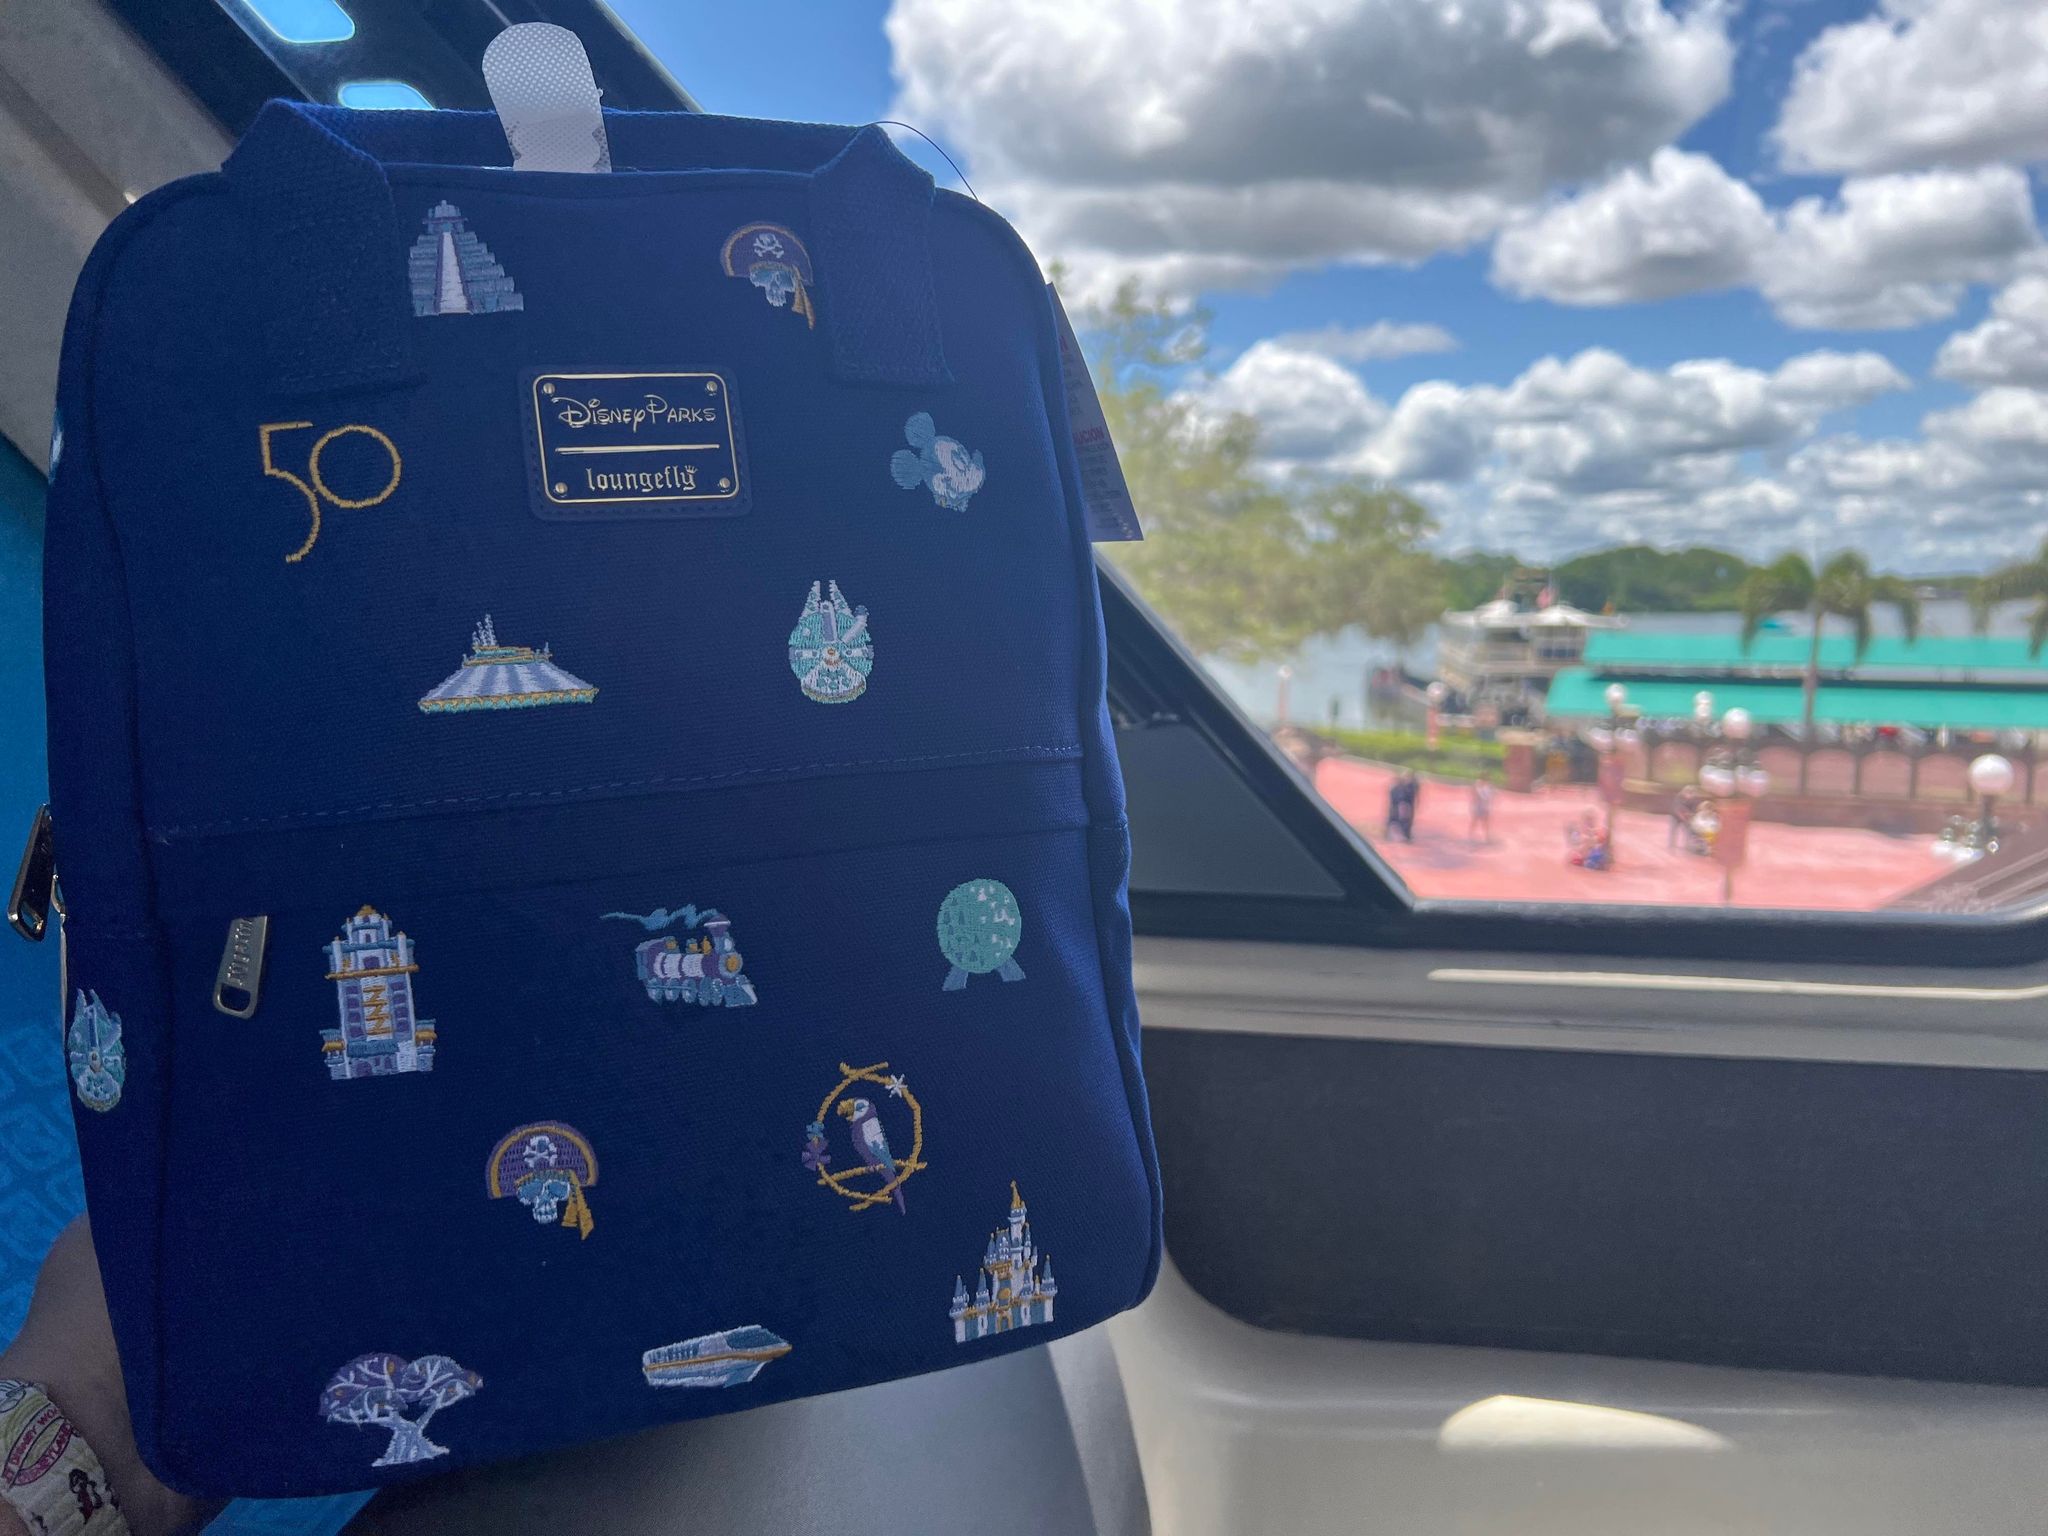 50th Anniversary Loungefly Canvas Backpack Arrives at Walt Disney World -  WDW News Today